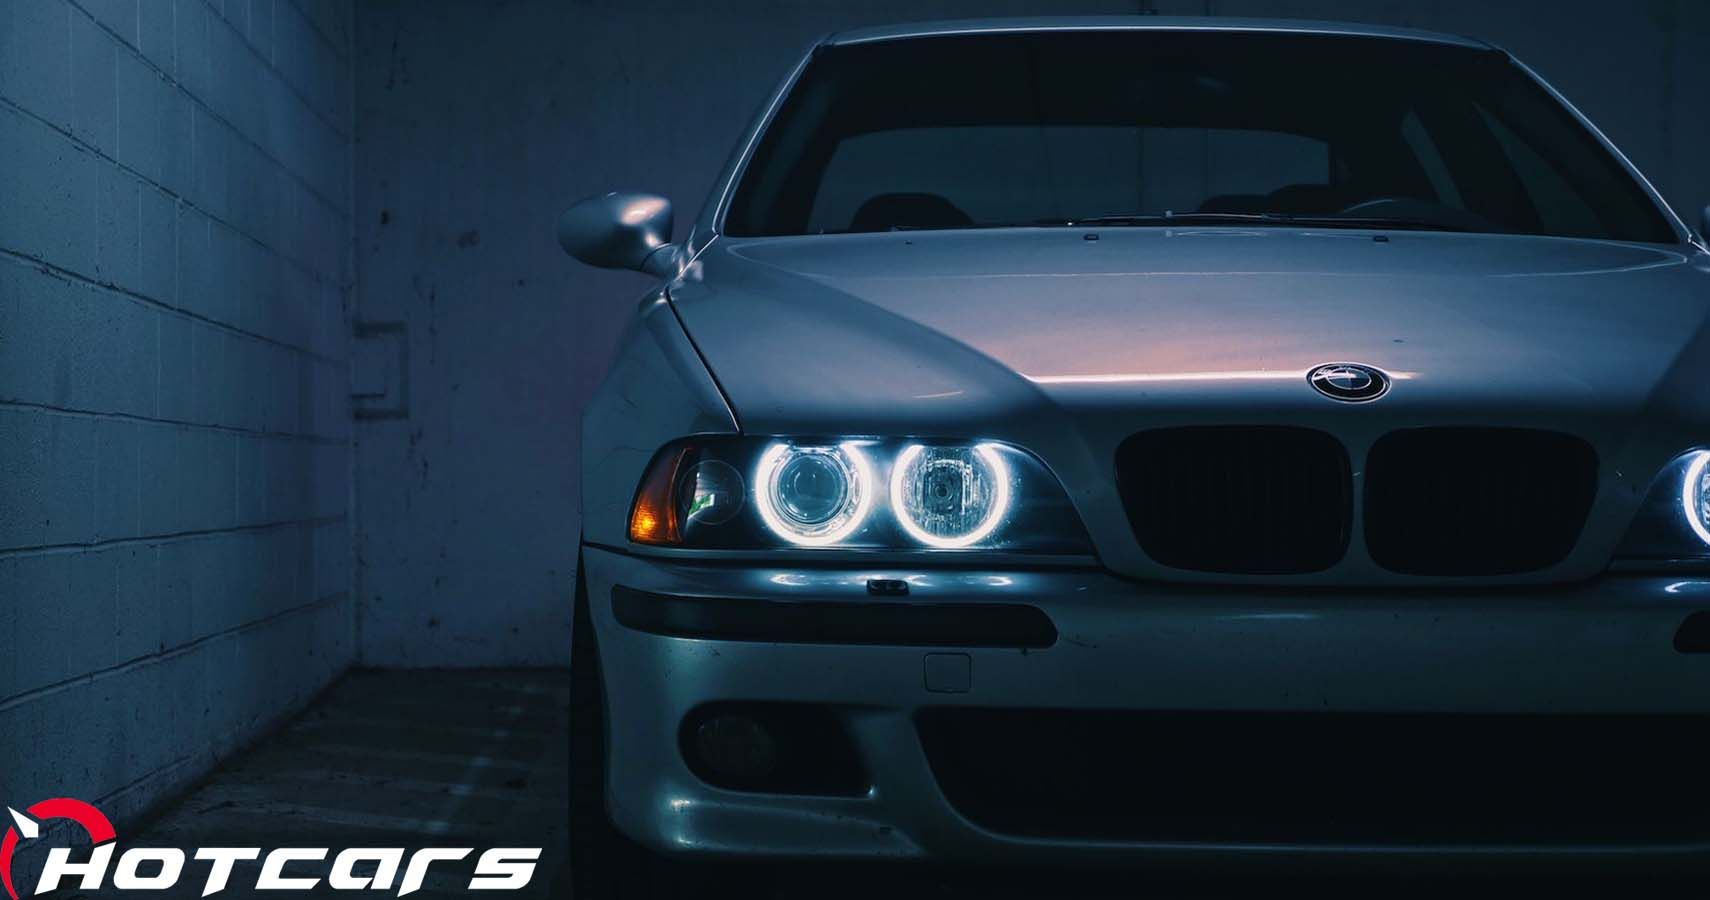 2003 BMW M5 Review: Worth Splurging On Before It's Too Late